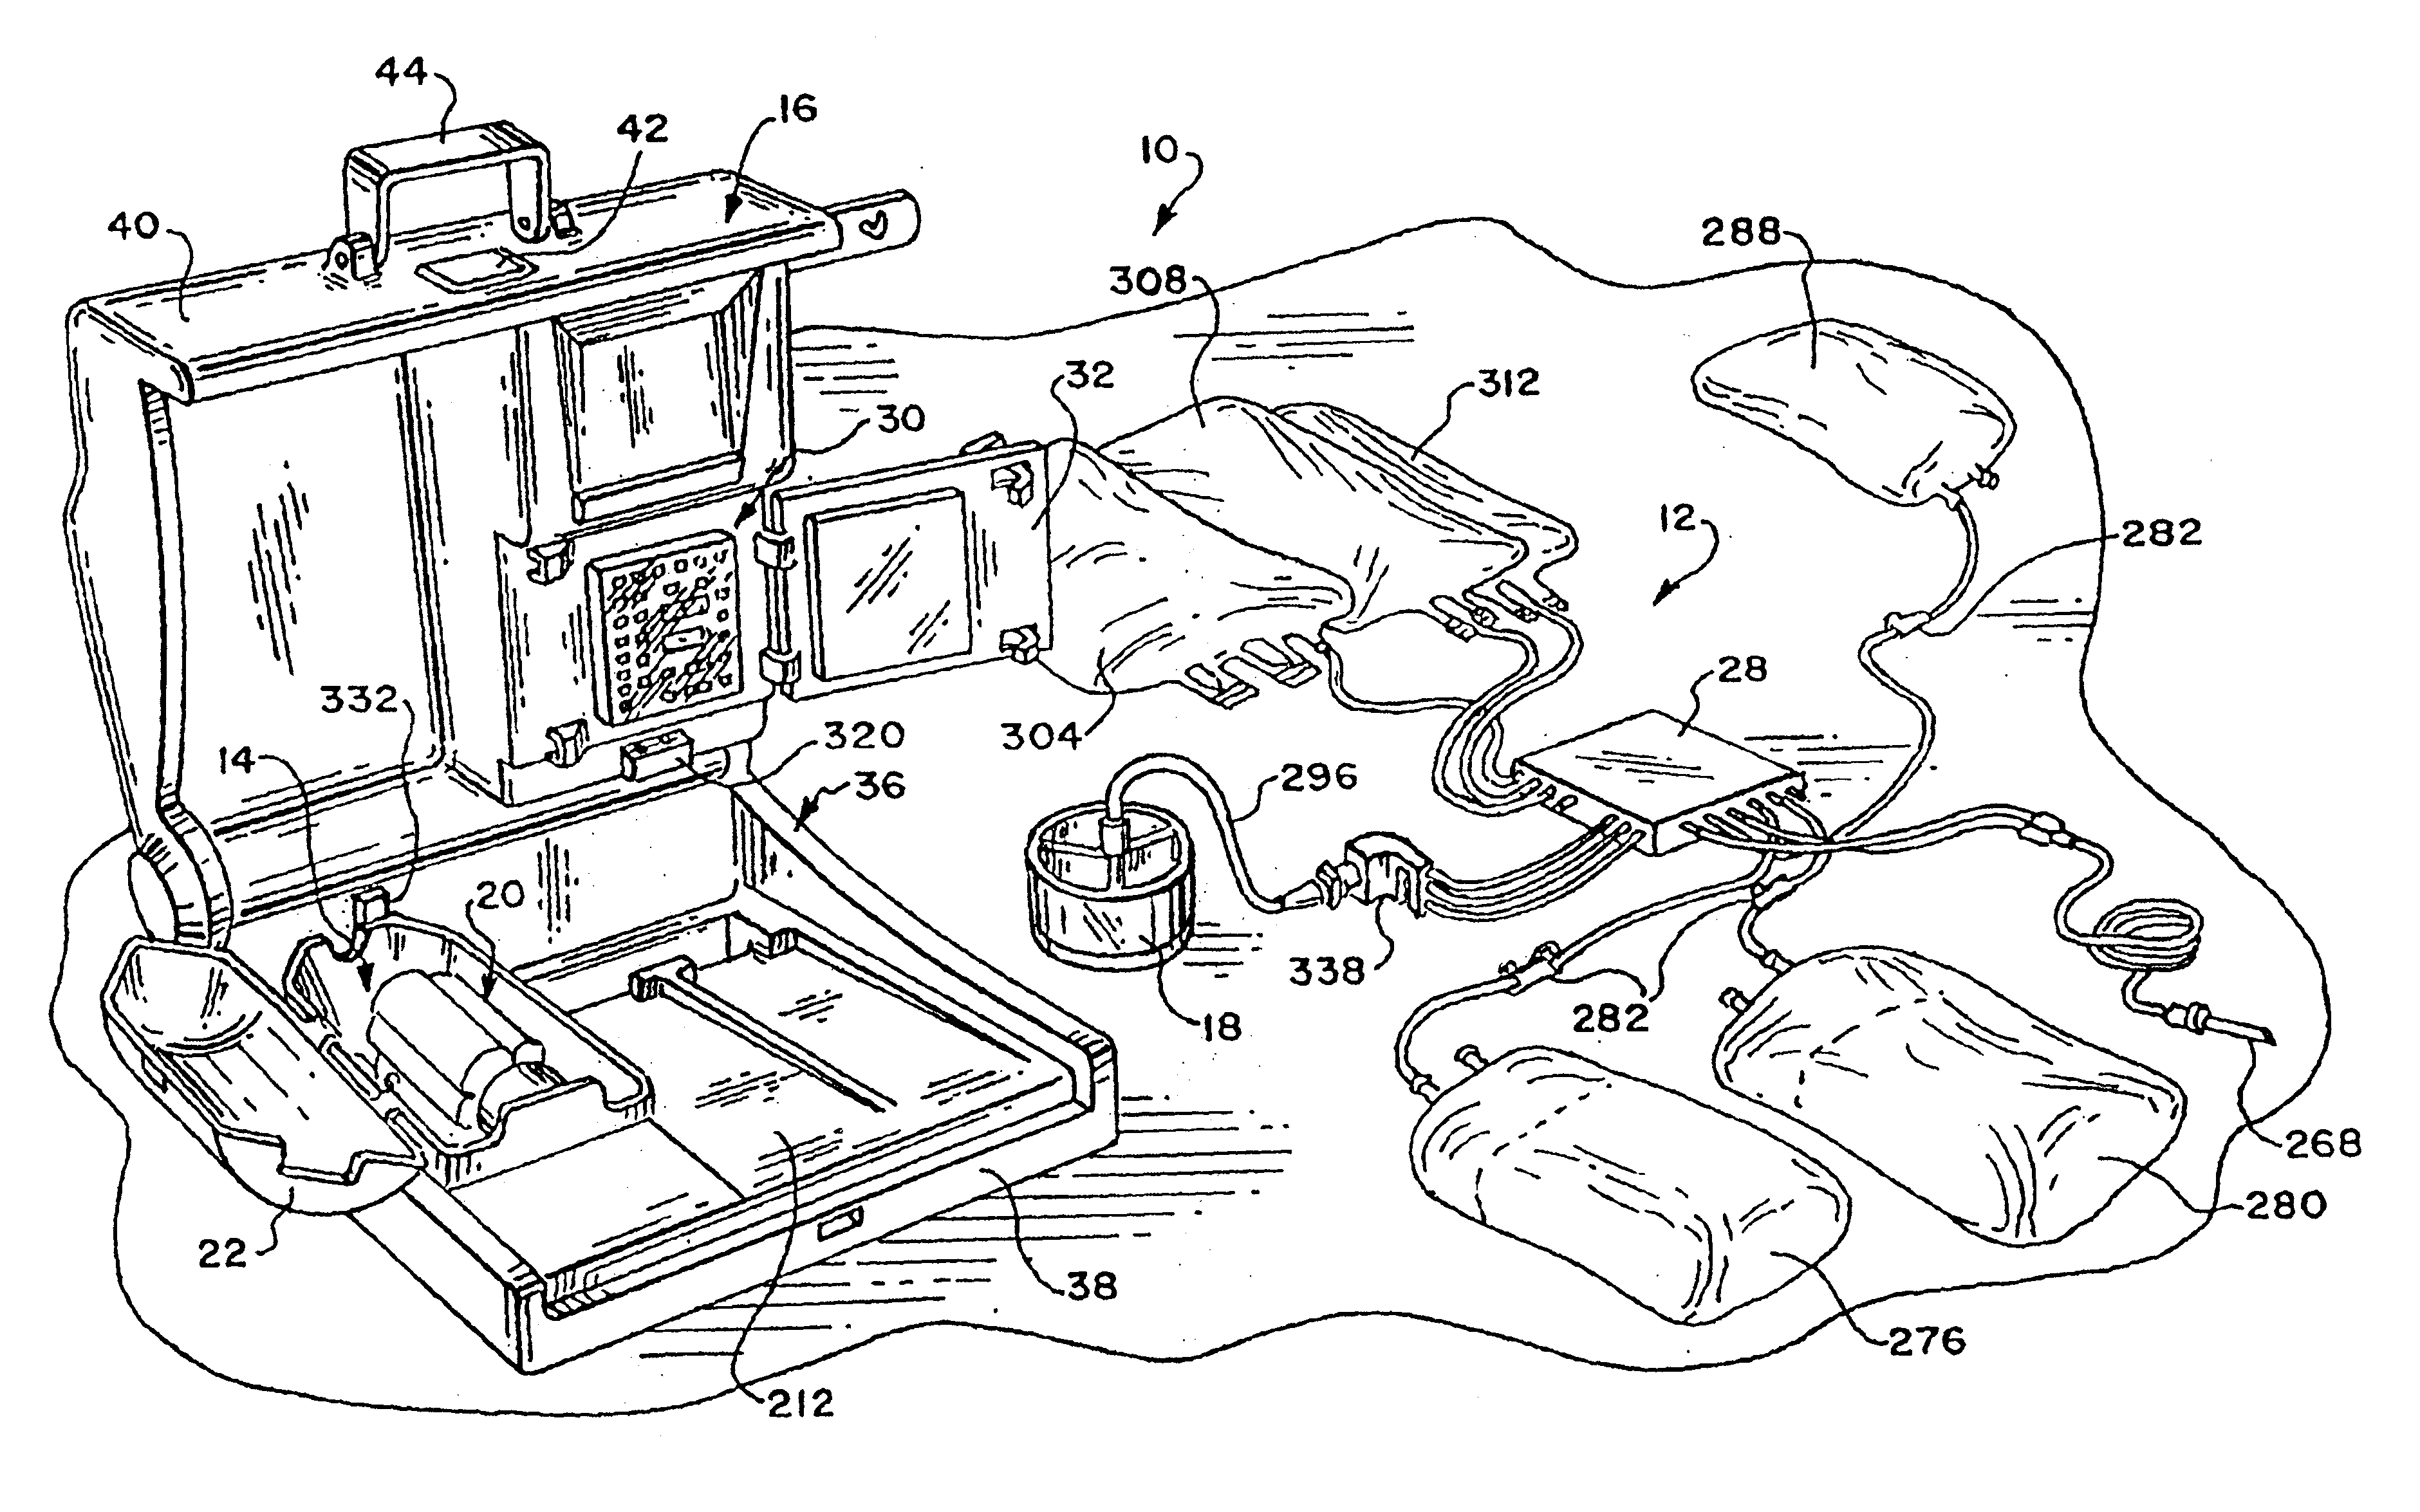 Systems and methods for control of pumps employing electrical field sensing